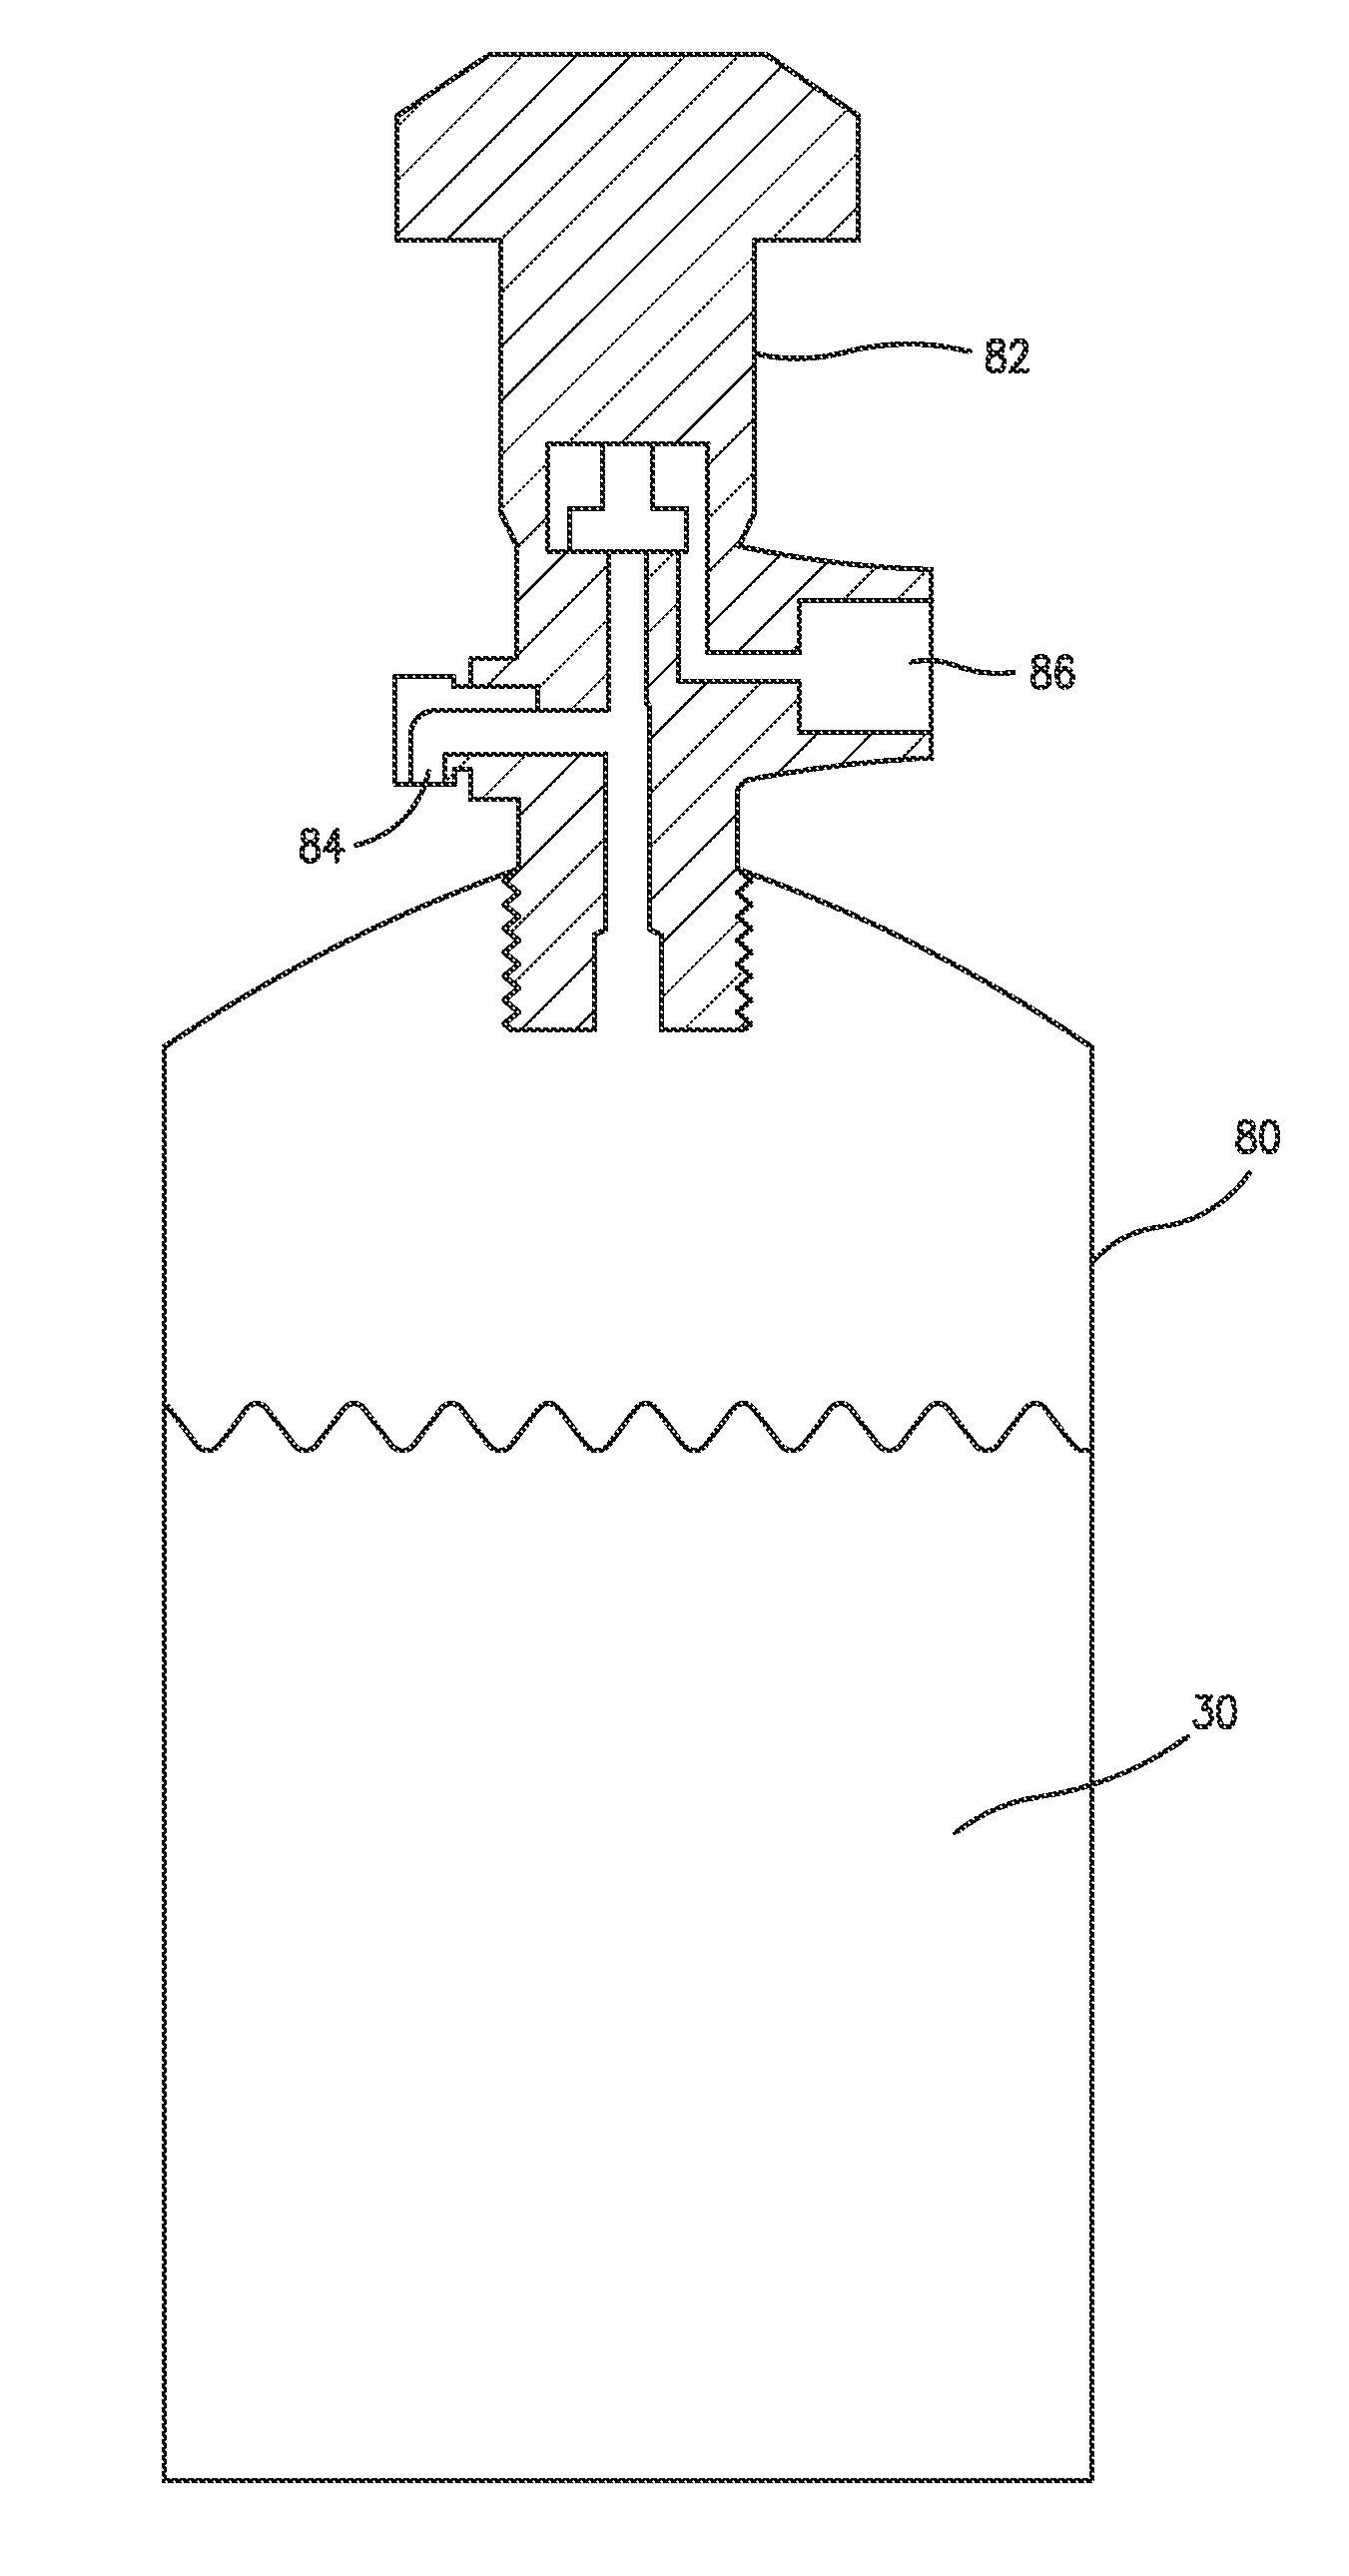 Fluid storage and dispensing methods and apparatus